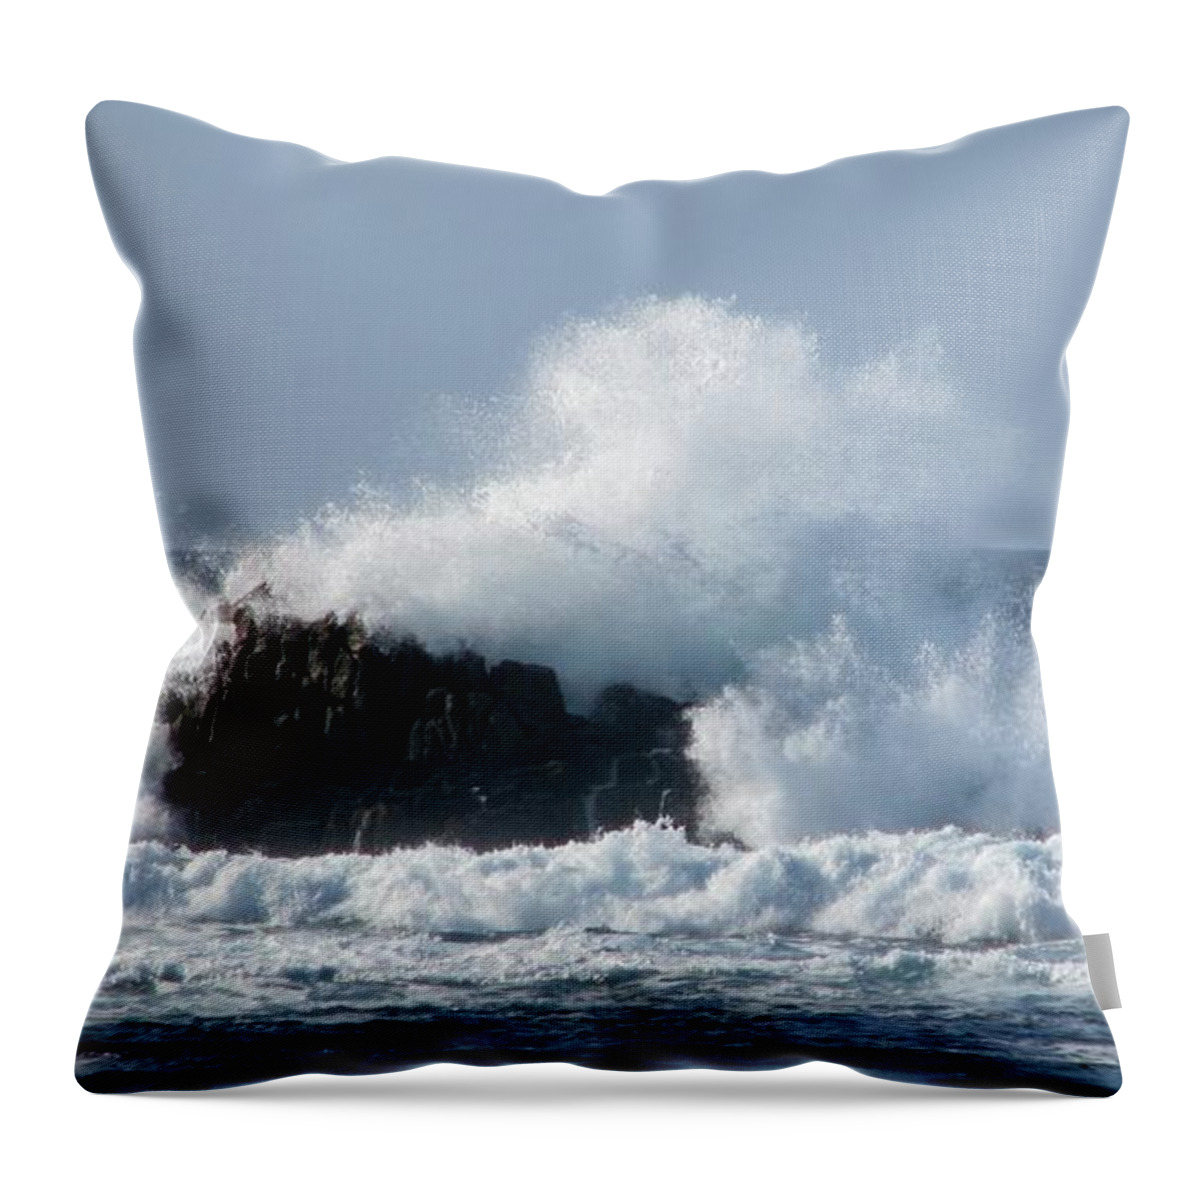 Ocean Throw Pillow featuring the photograph Blue Bay Breaker by James B Toy